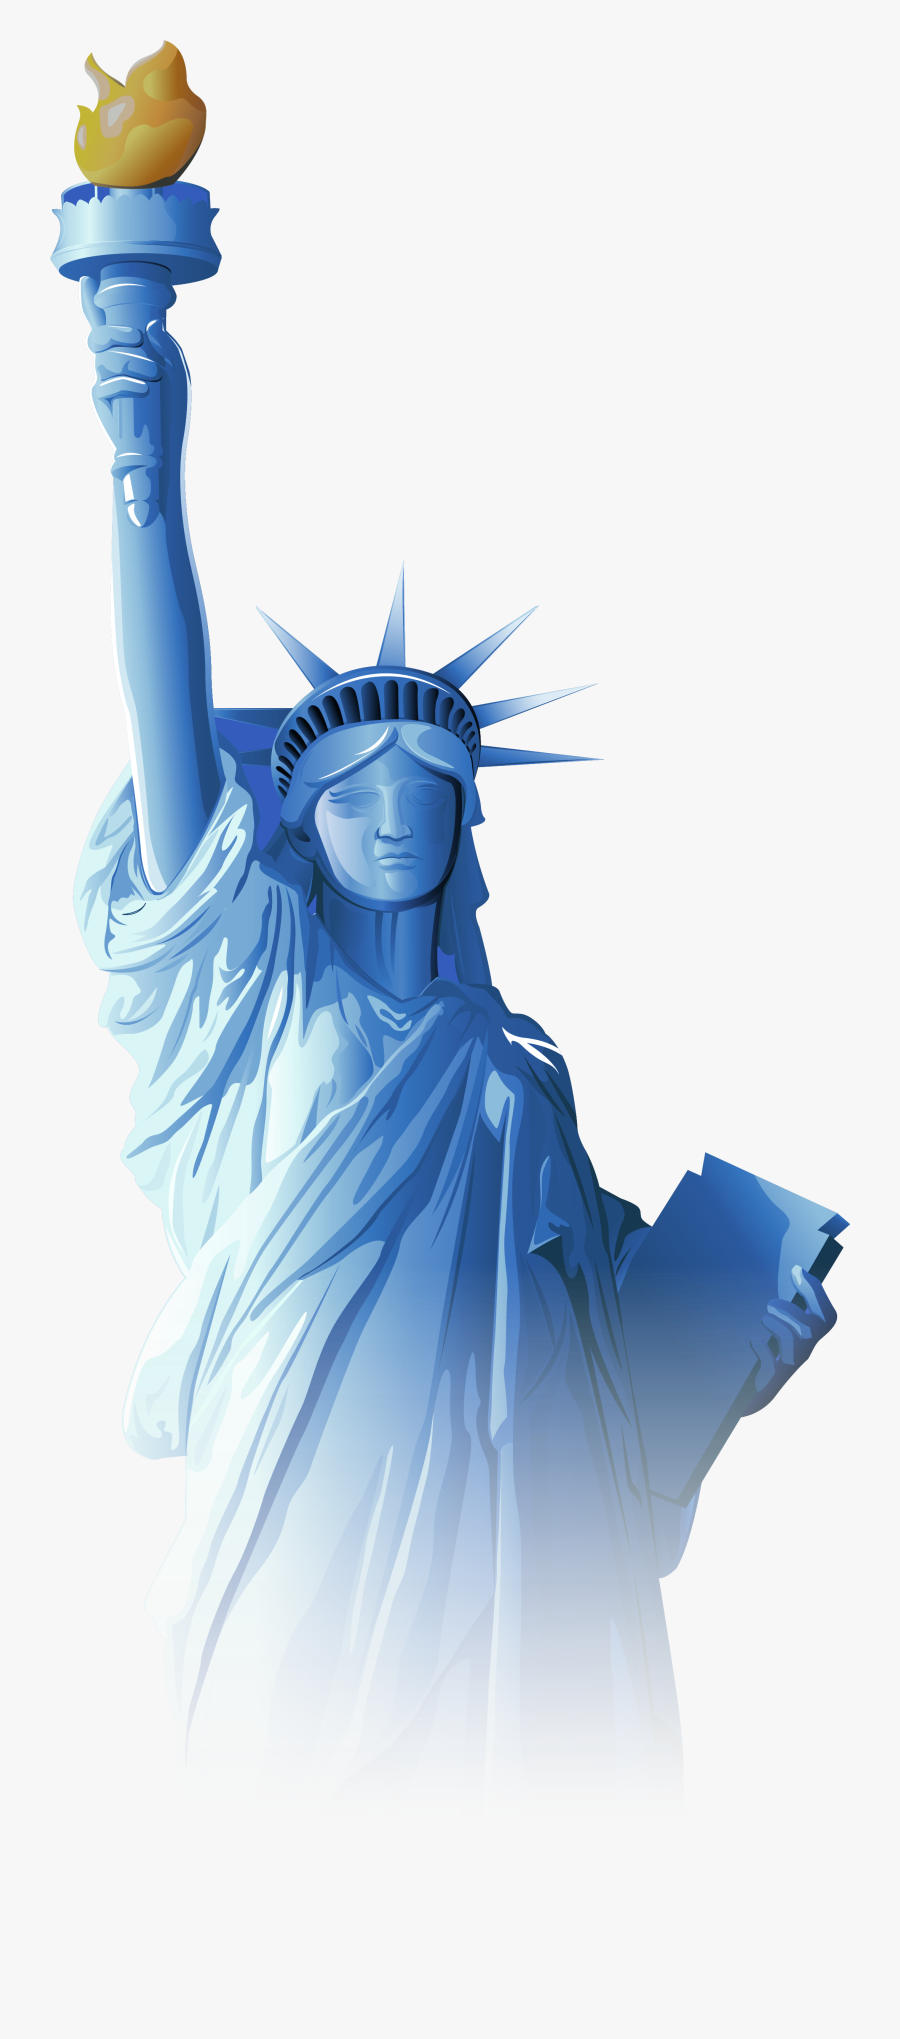 Statue Of Liberty Png - Statue Of Liberty Infographic, Transparent Clipart